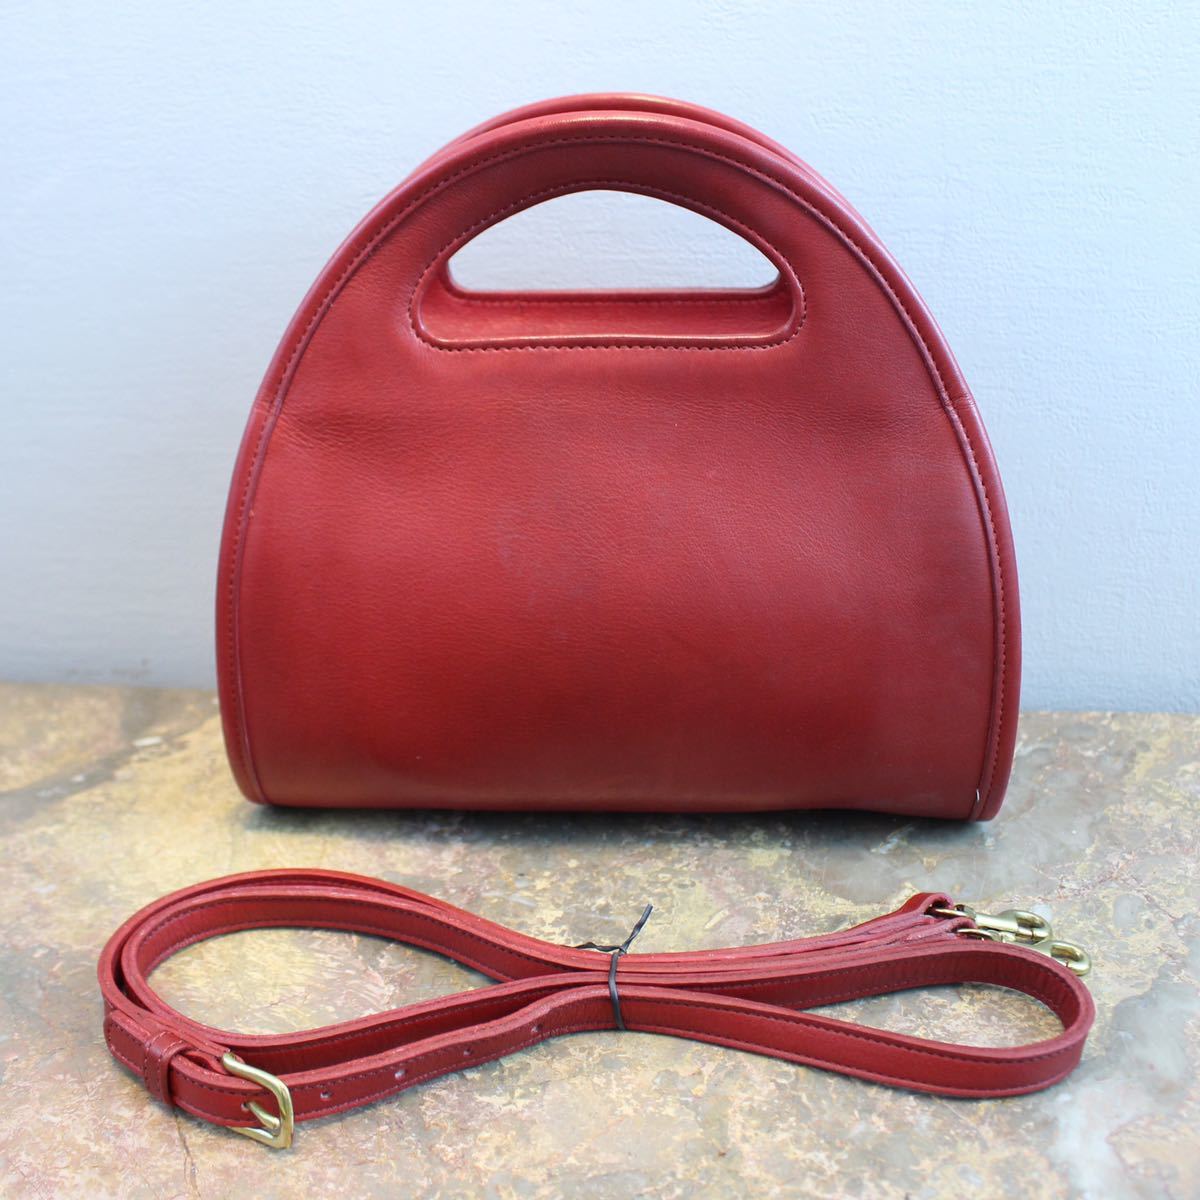 OLD COACH HALF MOON TYPE LEATHER 2WAY SHOULDER BAG MADE IN  USA/オールドコーチハーフムーン型レザー2wayショルダーバッグ